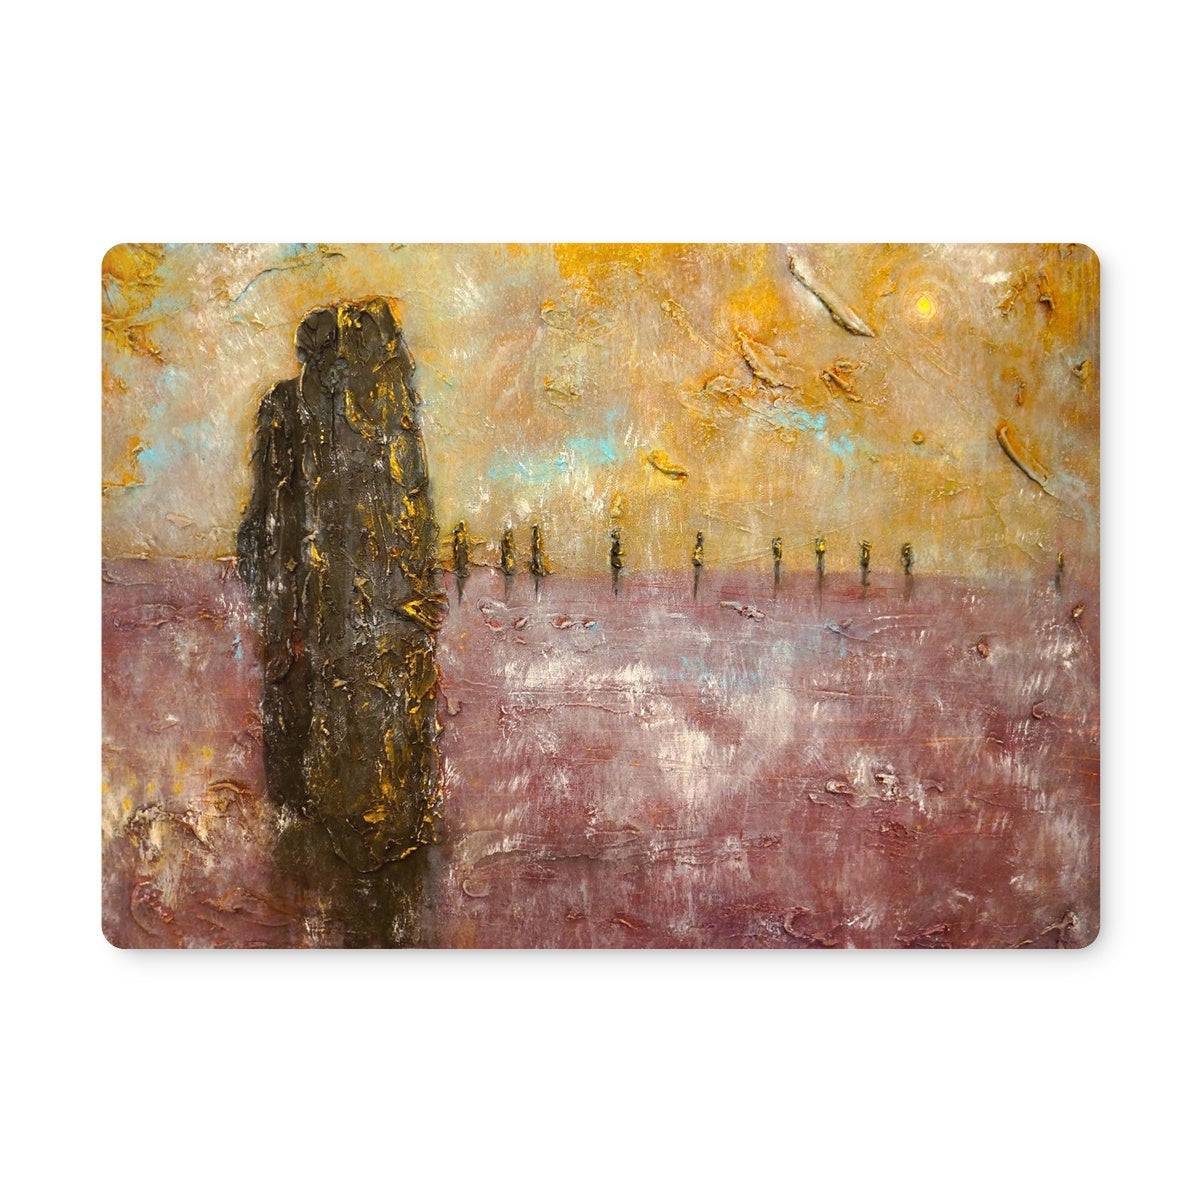 Bordgar Mist Orkney Art Gifts Placemat-Placemats-Orkney Art Gallery-2 Placemats-Paintings, Prints, Homeware, Art Gifts From Scotland By Scottish Artist Kevin Hunter